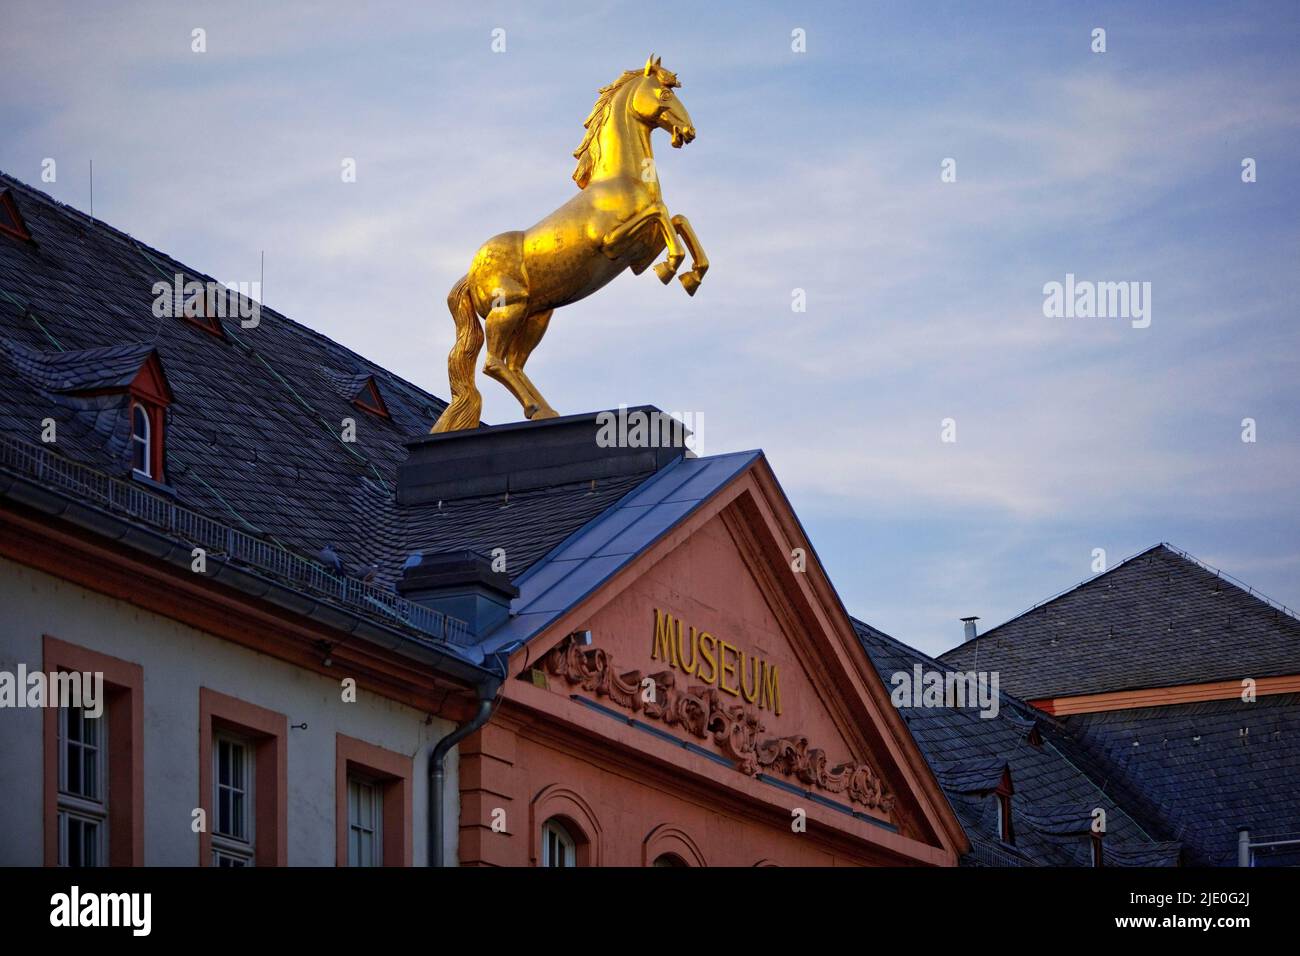 Landesmuseum Mainz in the former Golden Ross Barracks with corresponding roof figure, Mainz, Rhineland-Palatinate, Germany Stock Photo